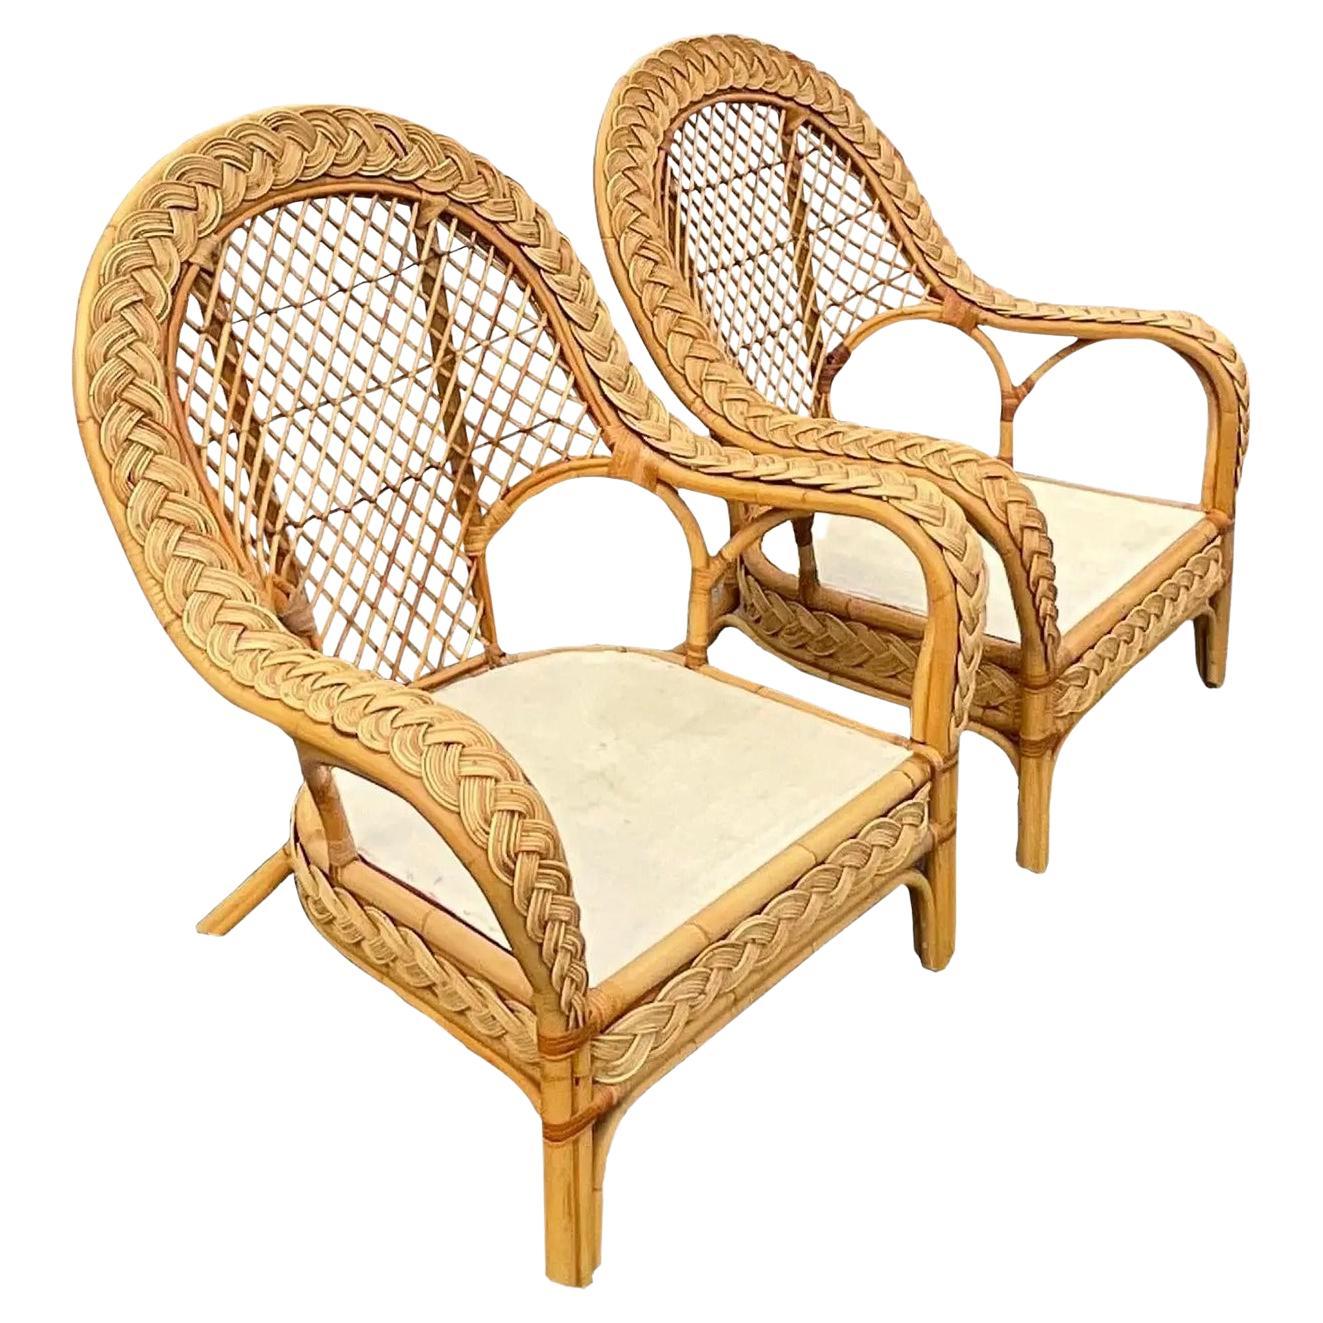 Vintage Coastal Braided Rattan Paddle Back Lounge Chairs - a Pair